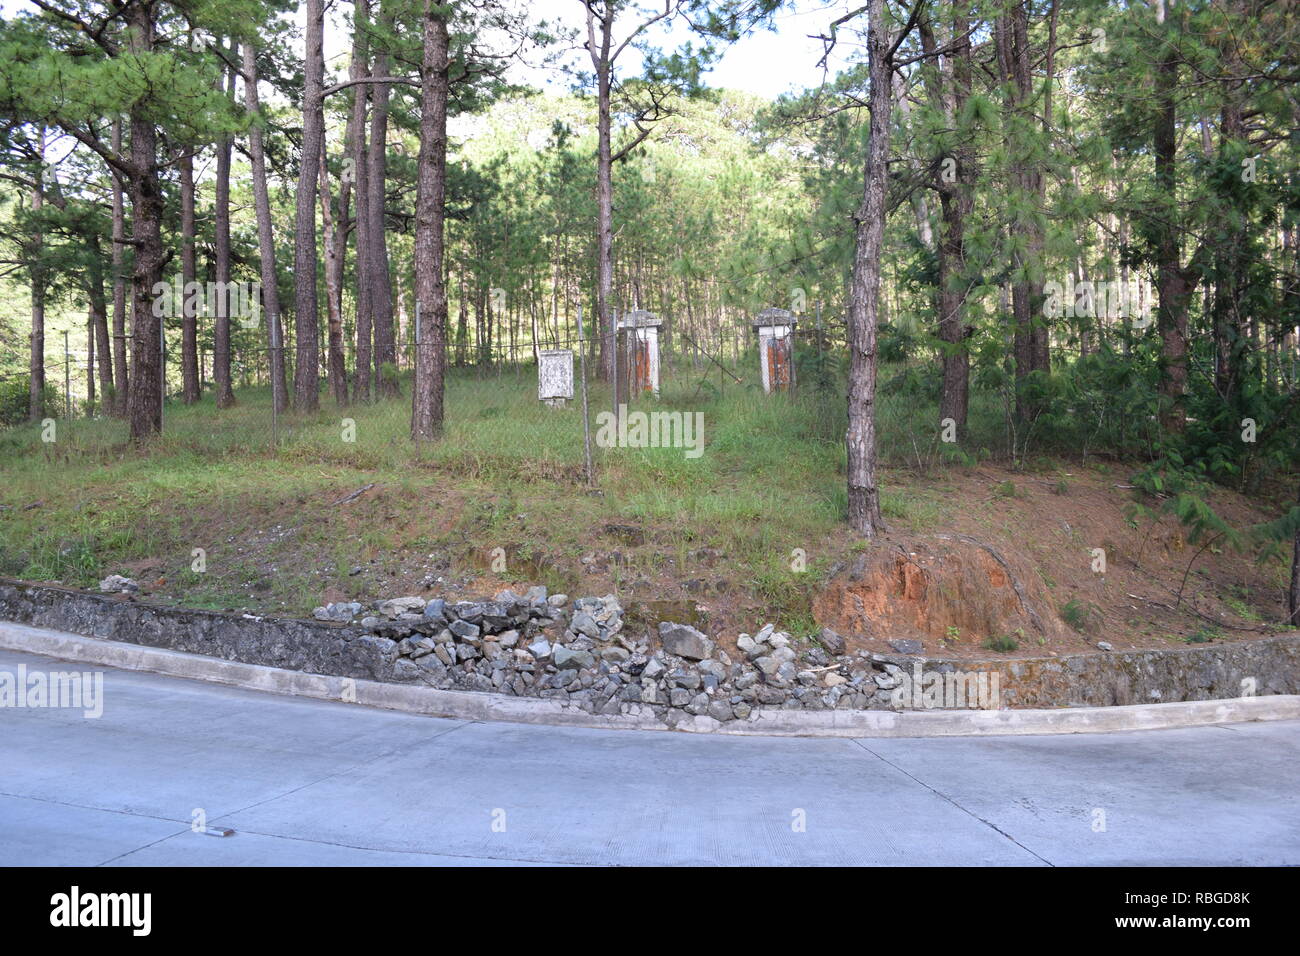 The 1st. Phil-Am, Veterans Cemetery is the final resting place for military and civilian victims of foreign wars and lay embedded in the Camp John Hay Stock Photo